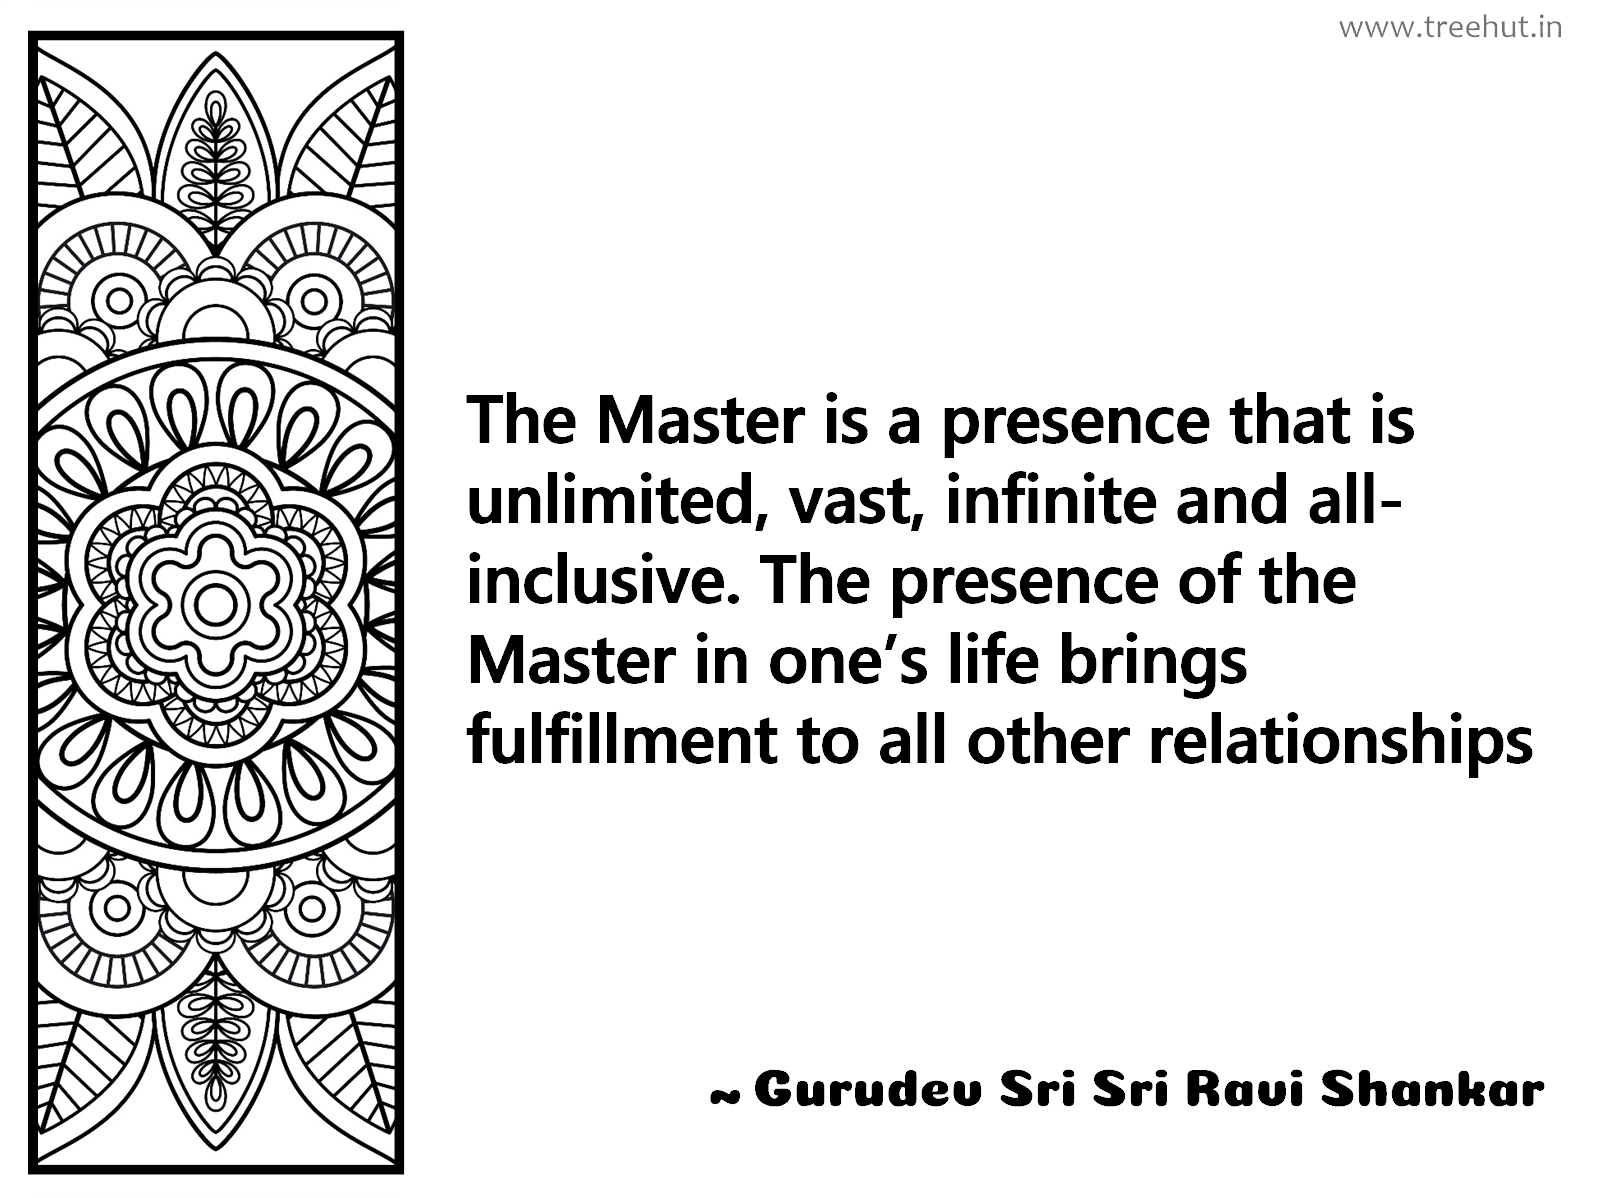 The Master is a presence that is unlimited, vast, infinite and all-inclusive. The presence of the Master in one’s life brings fulfillment to all other relationships Inspirational Quote by Gurudev Sri Sri Ravi Shankar, coloring pages